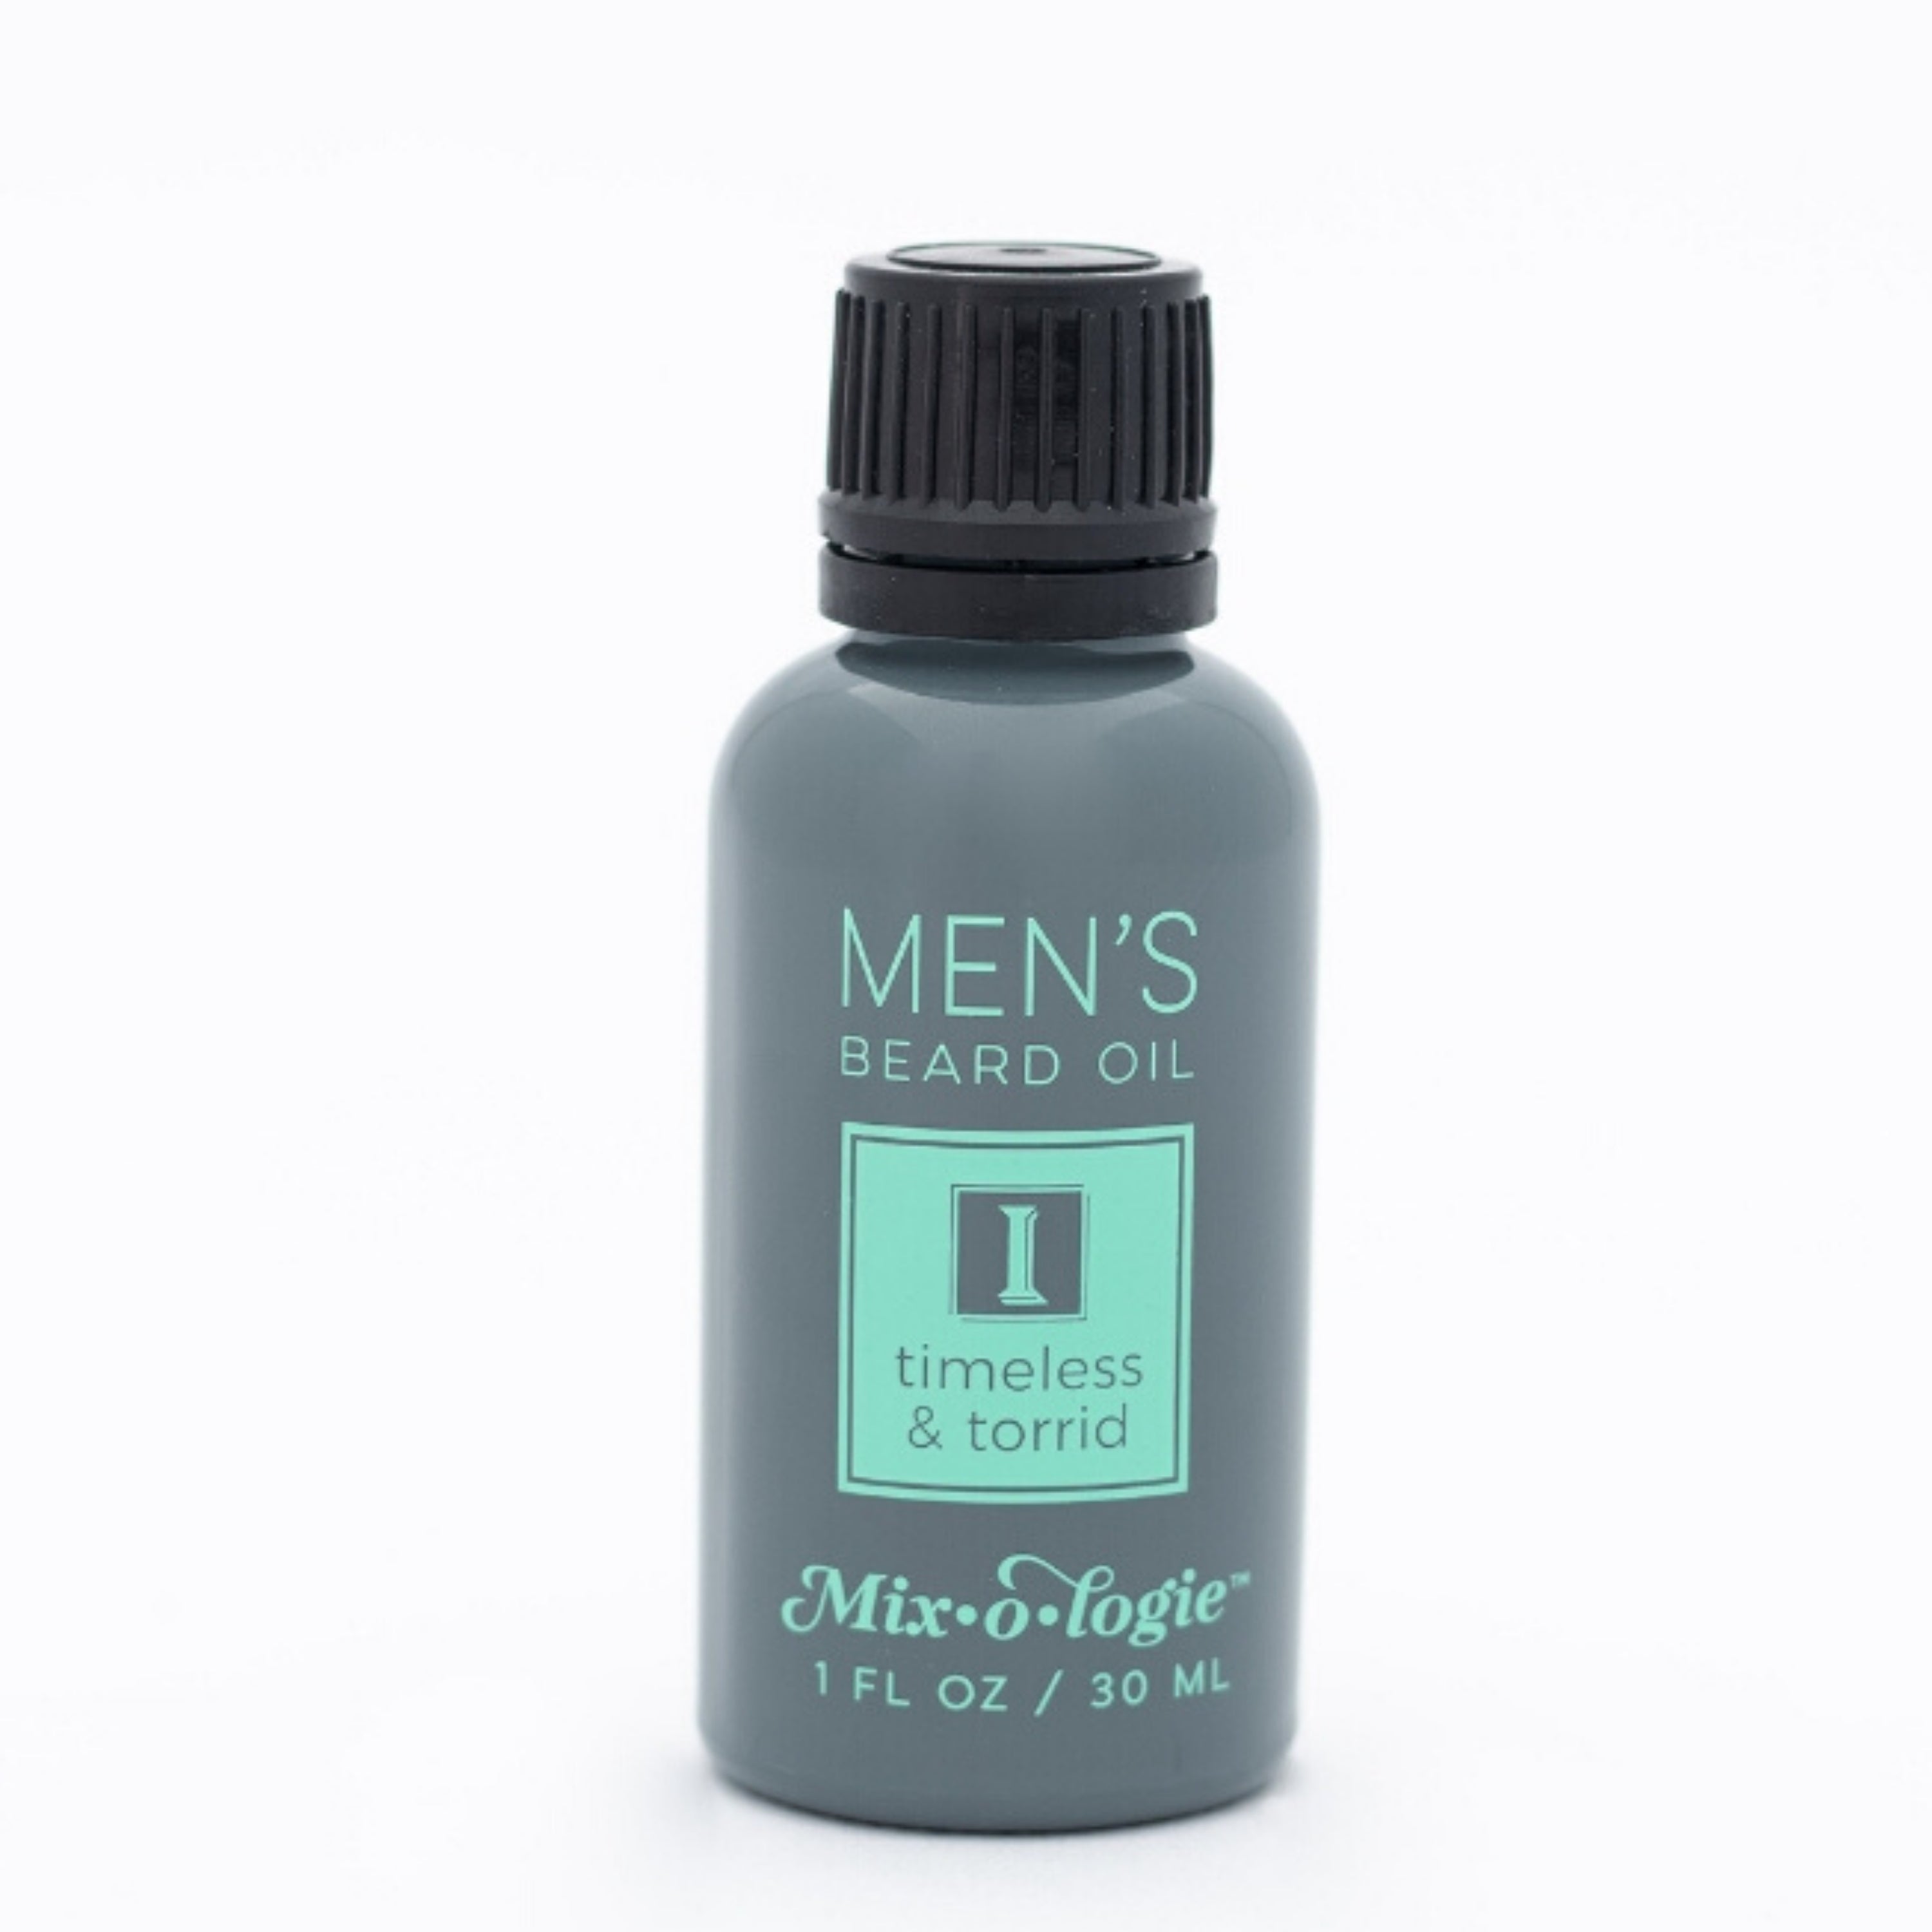 Men’s Beard Oil in Men’s I (Timeless & Torrid) in a black and grey tube with green accents. 1 fl oz or 30 mL. Pictured on white background.